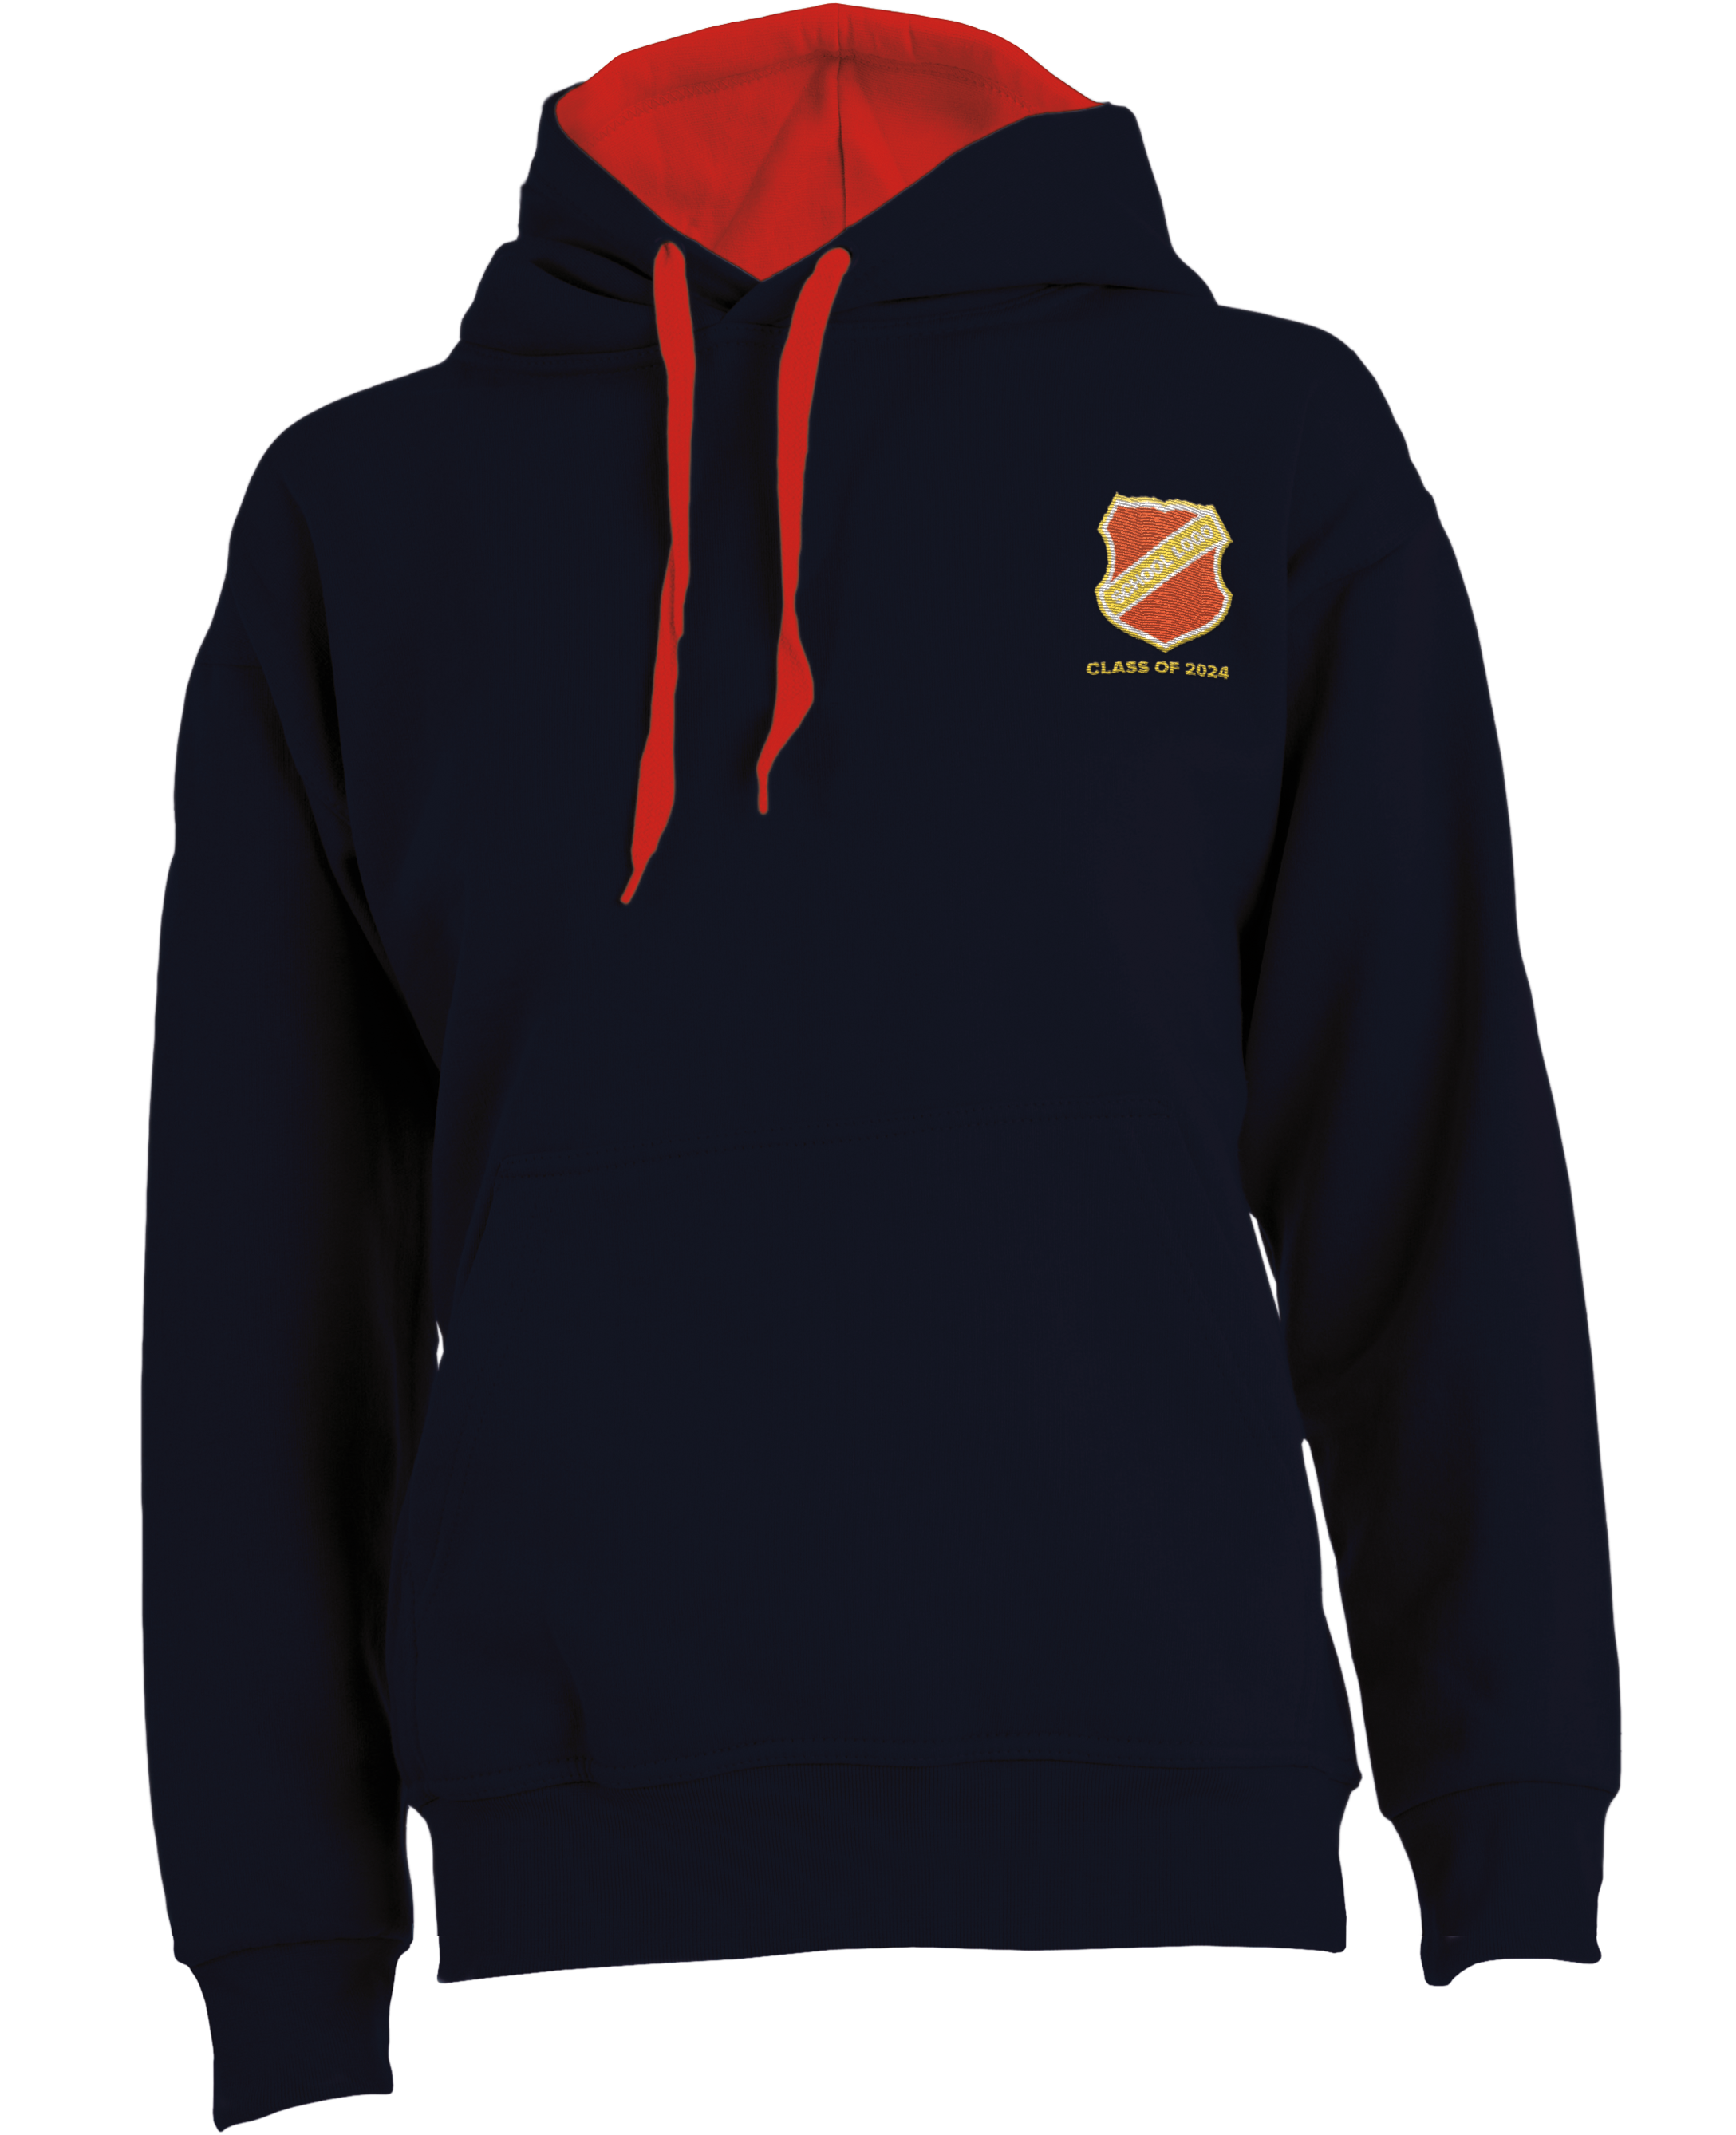 Hoodie front 4.png